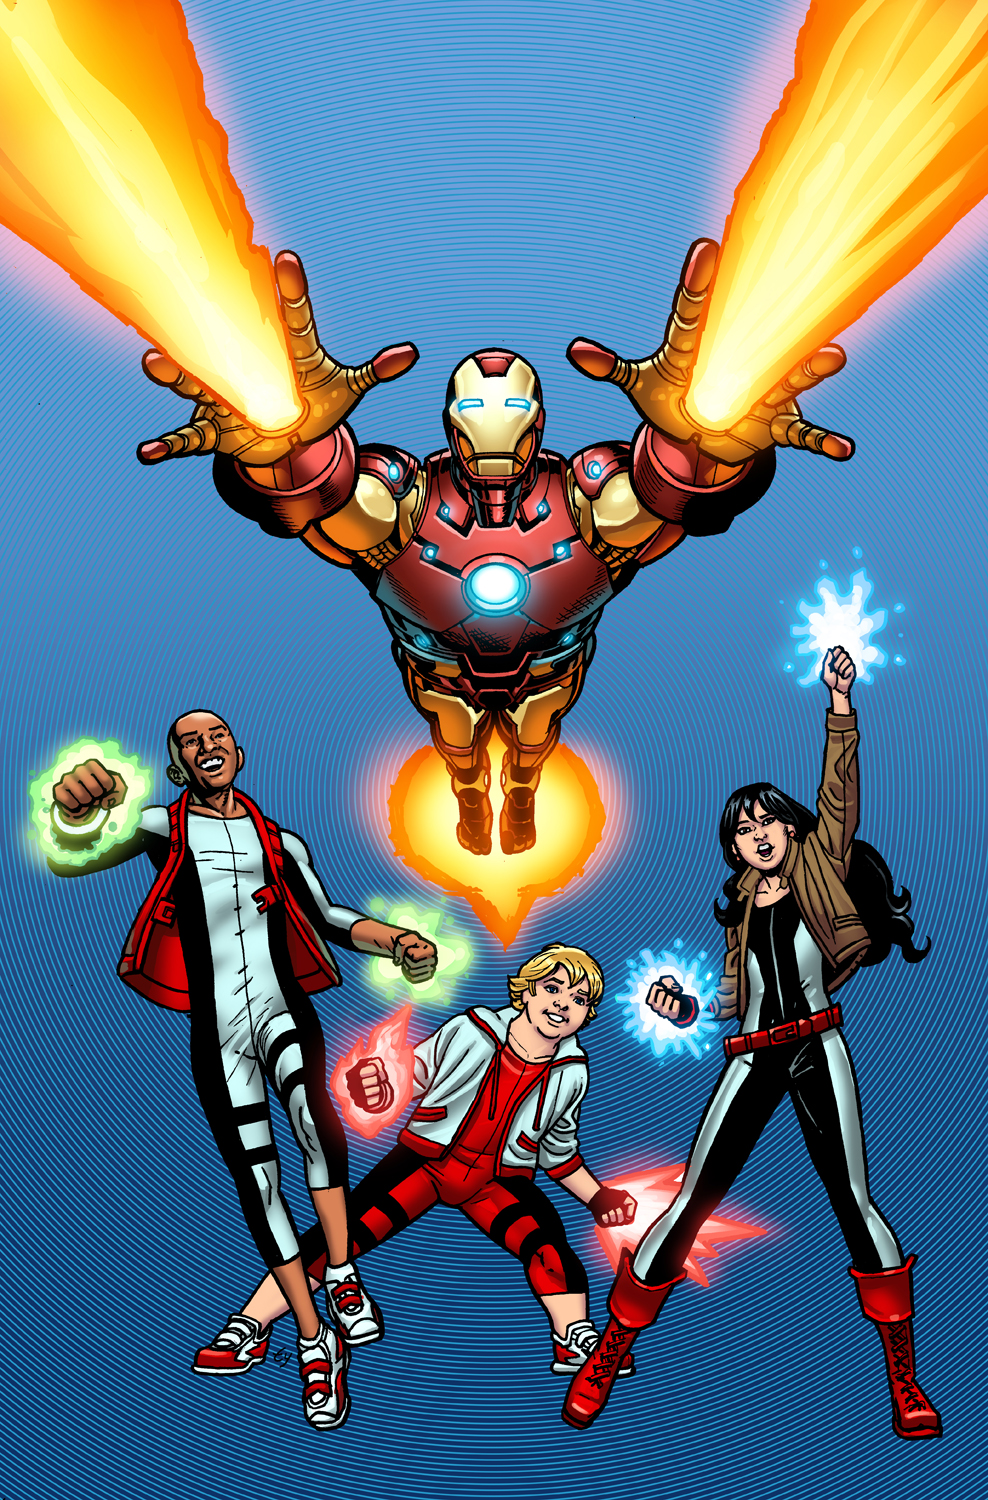 Marvel Teams up with Florida Blue and Wellpoint to Create New Iron Man Comic Book